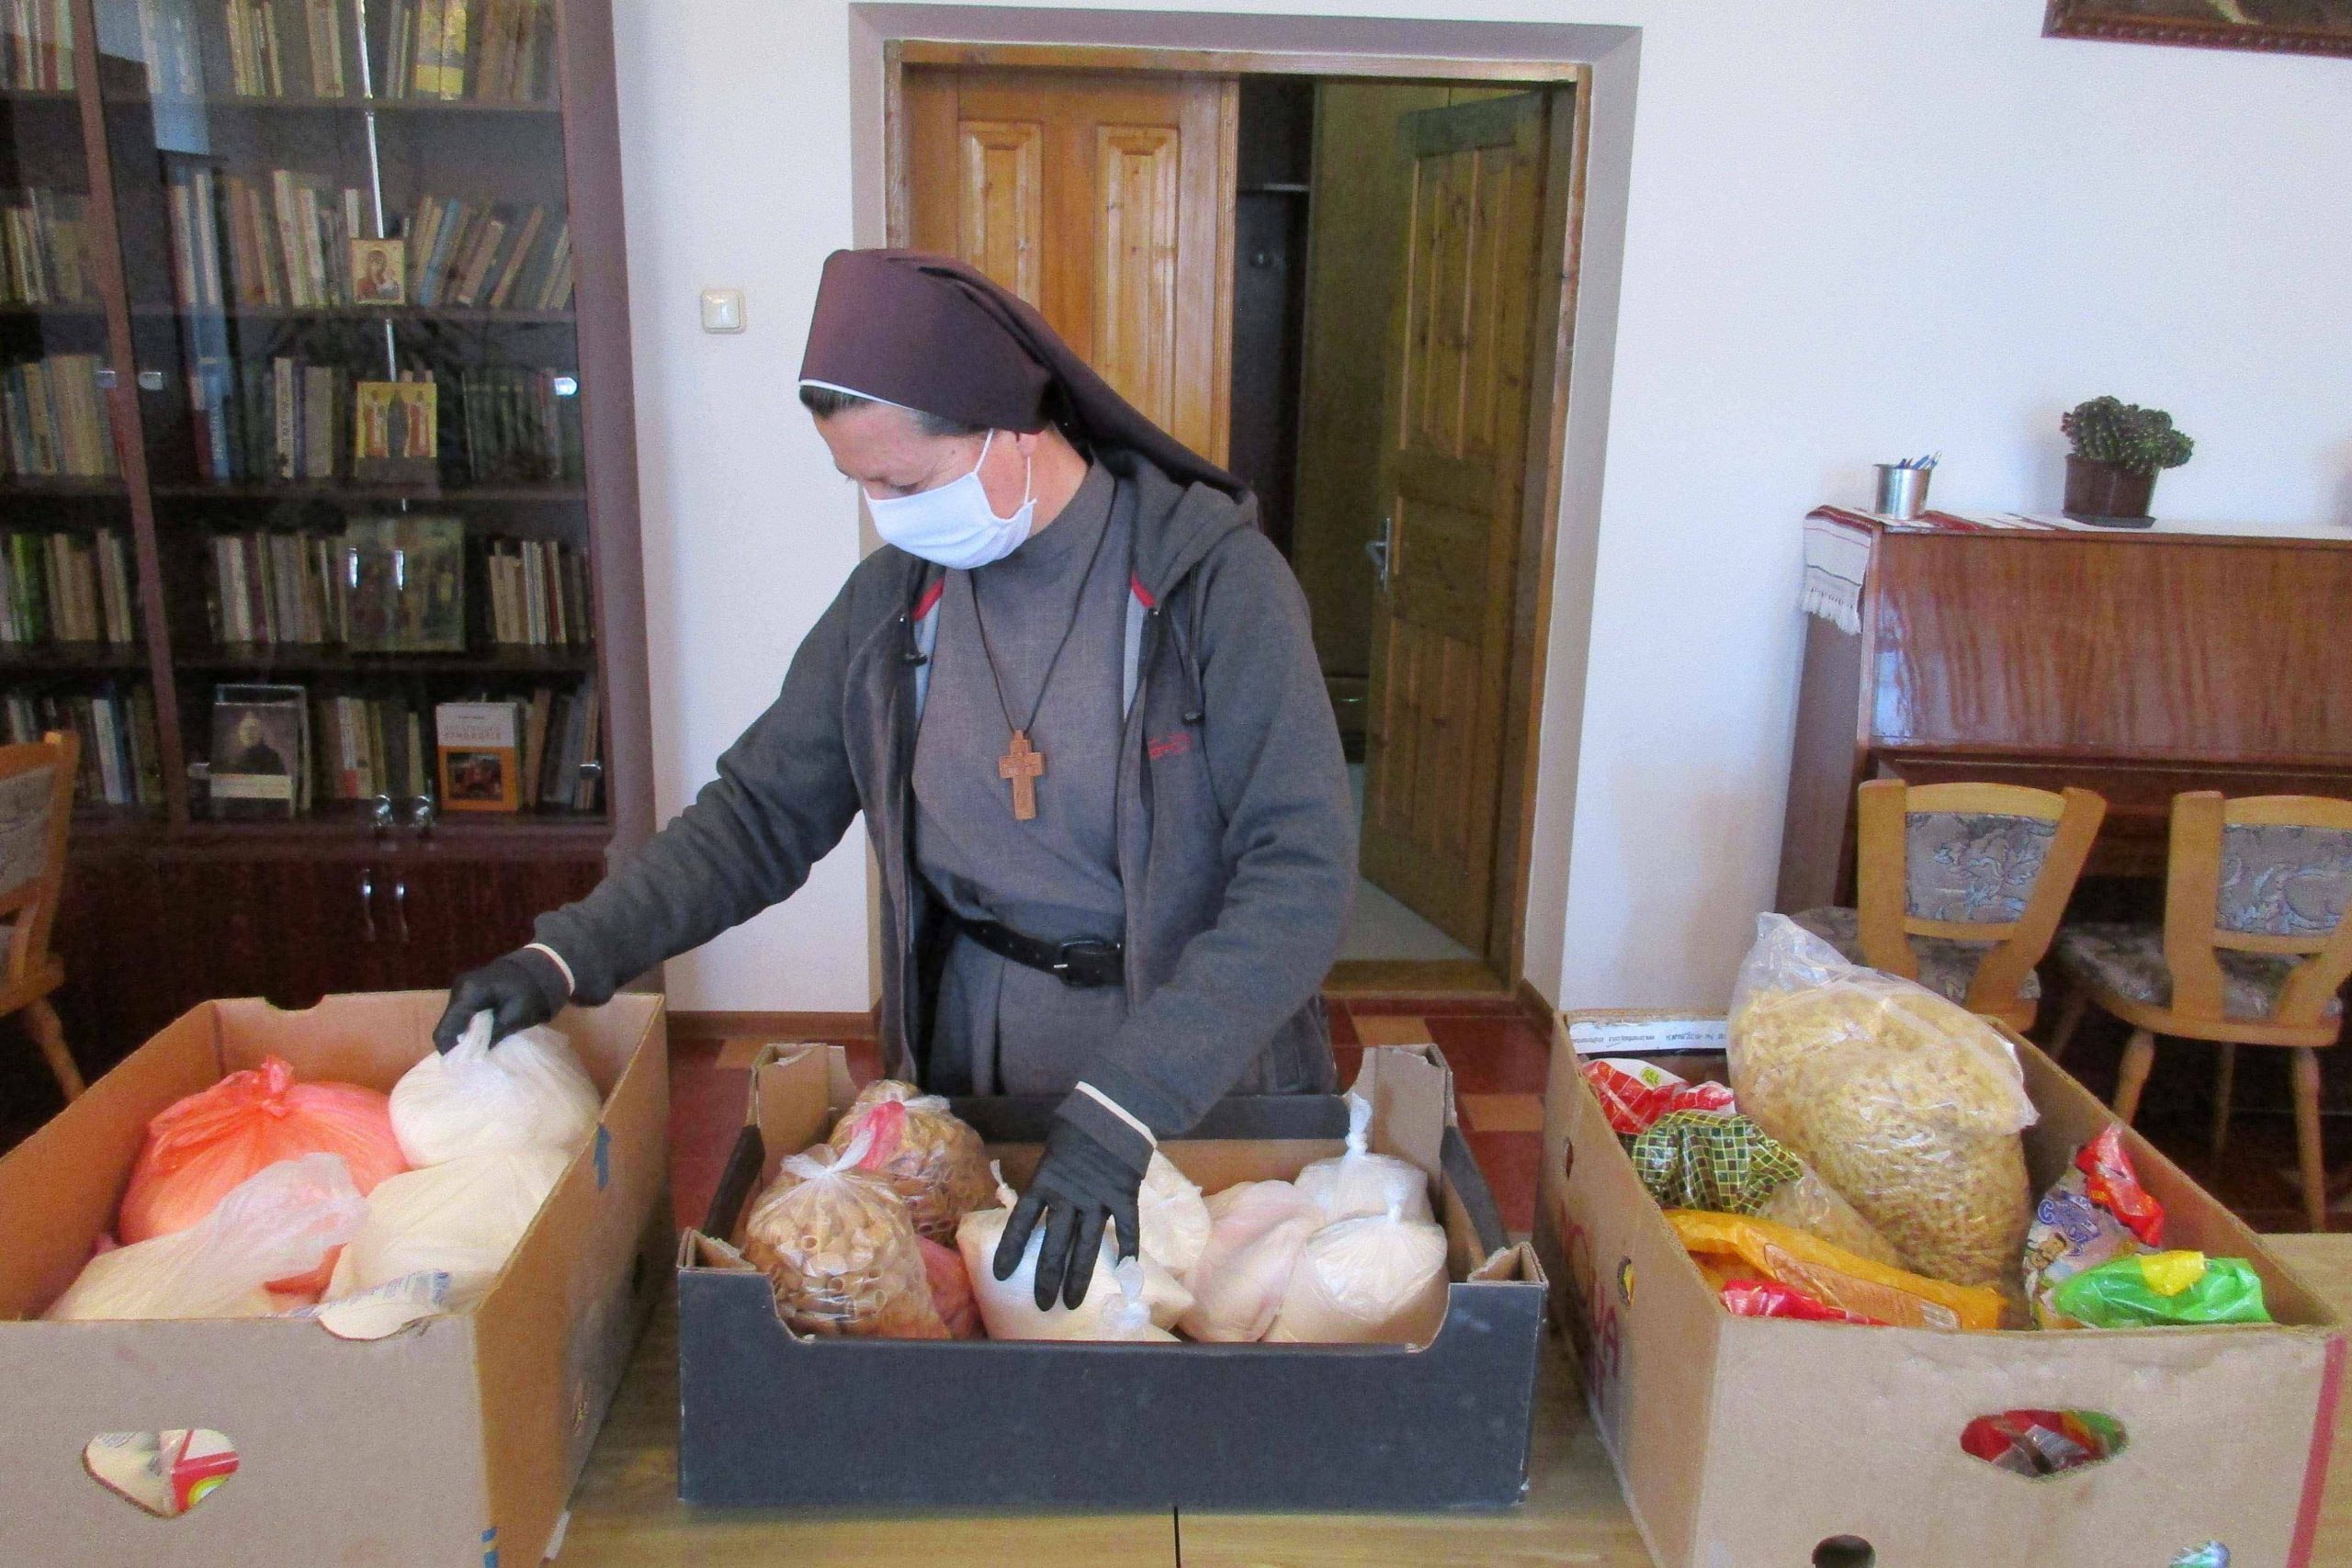 Sisters in Ukraine are helping those in need during COVID-19 pandemic.